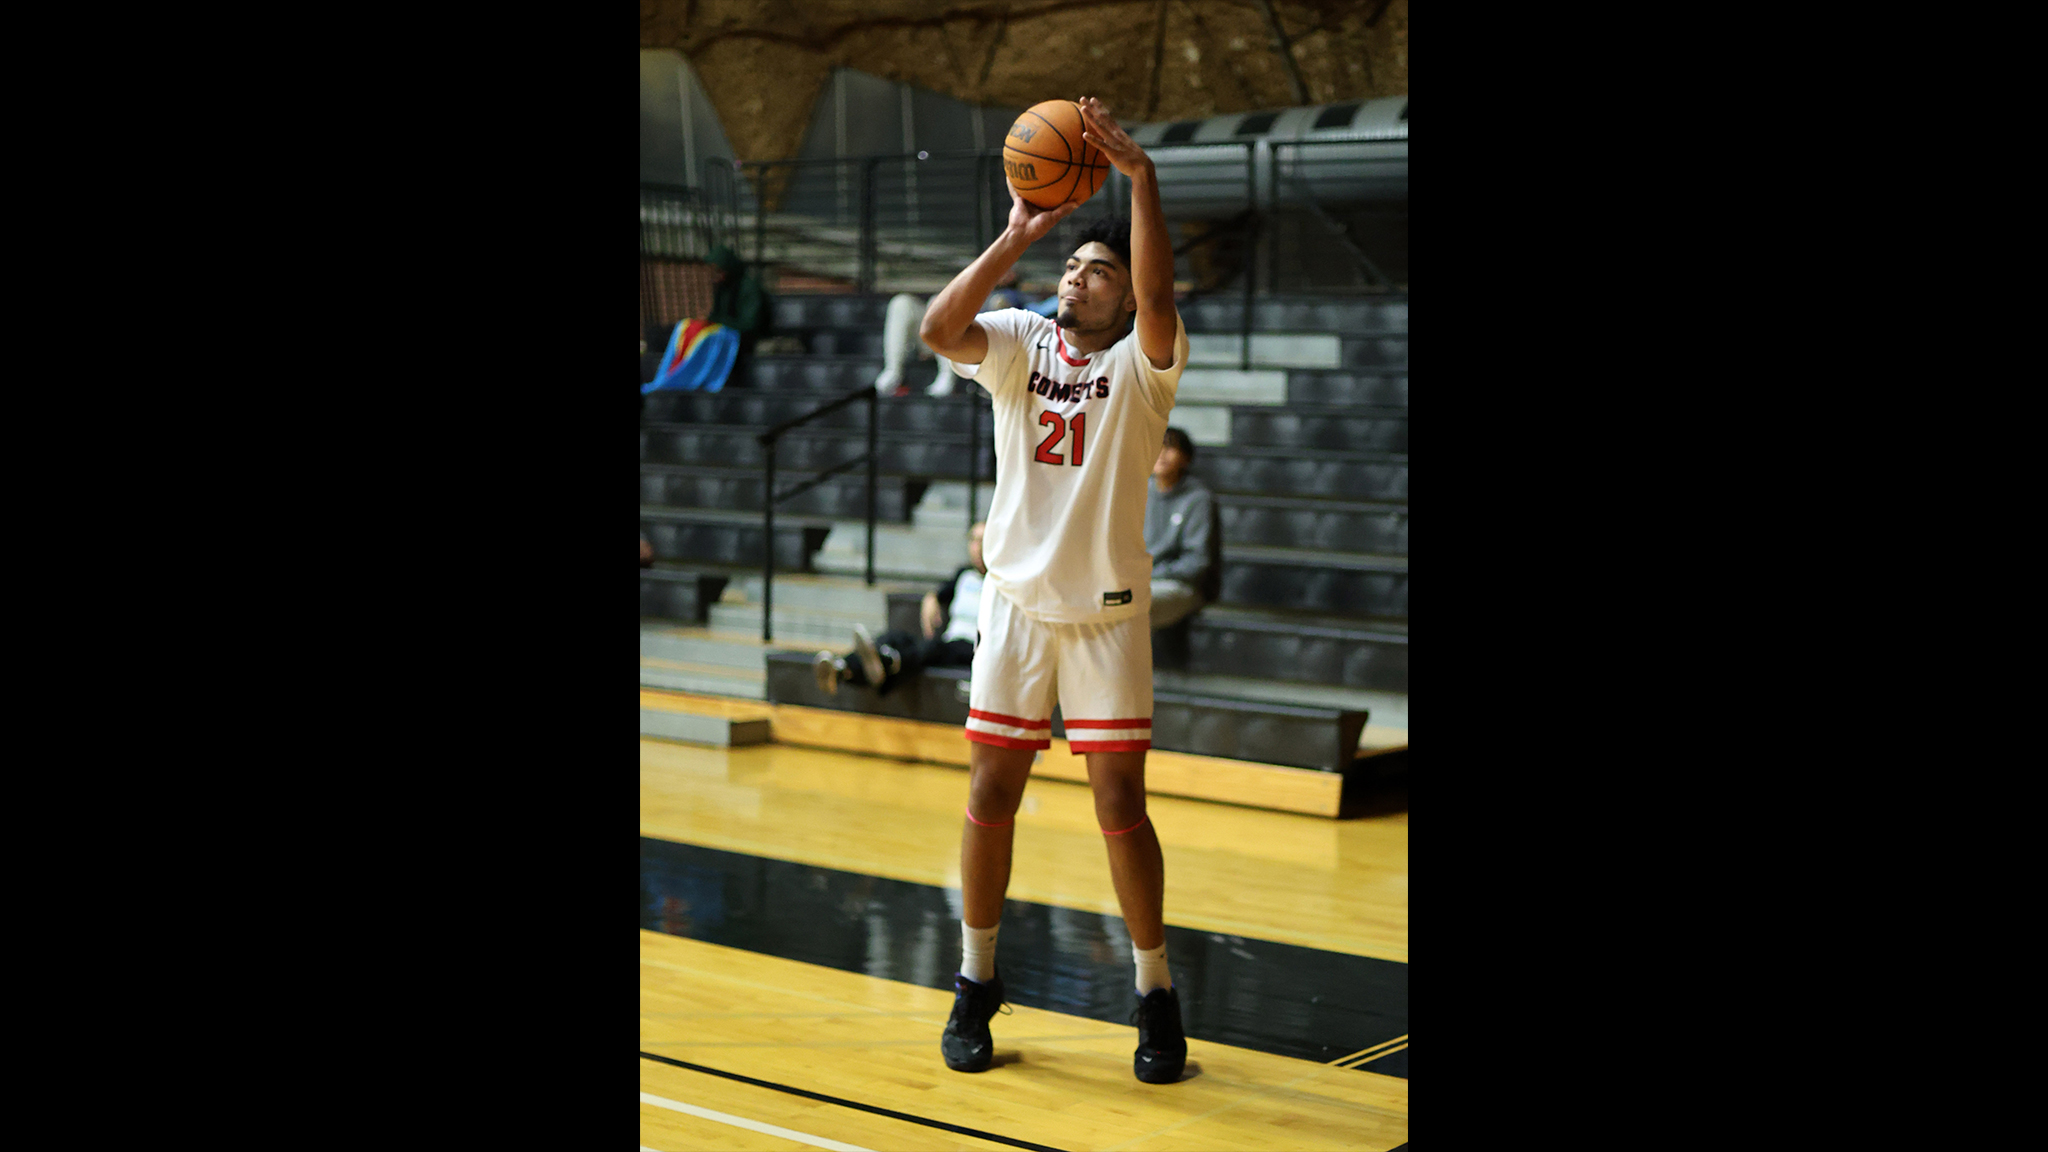 Jaden Mathis went 4-8 at the 3-point line. Photo by Hugh Cox.